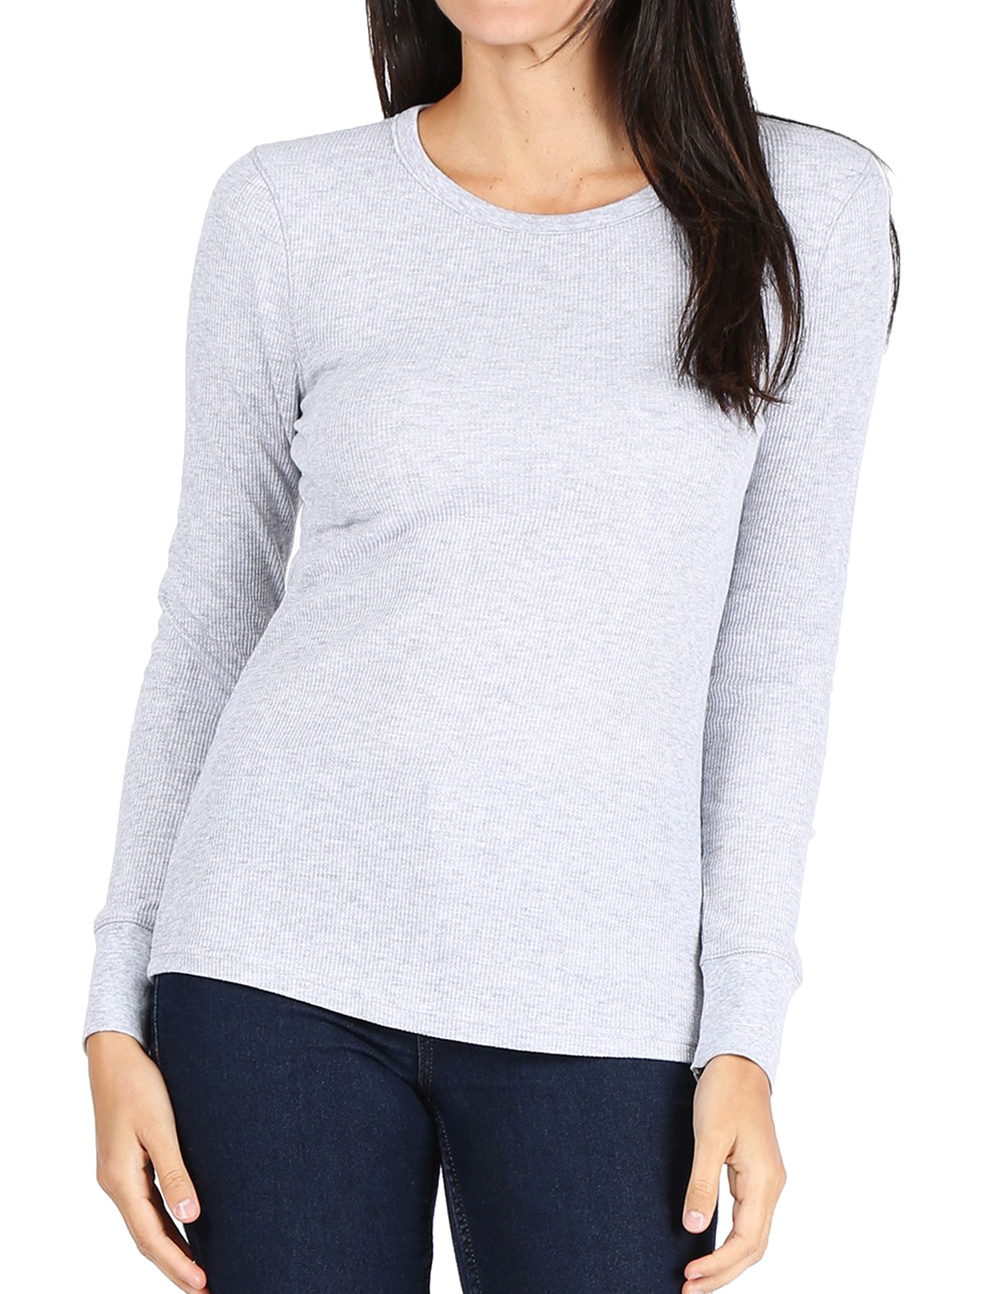 315 RED Women's Long Sleeve Thermal Crew Neck Tee